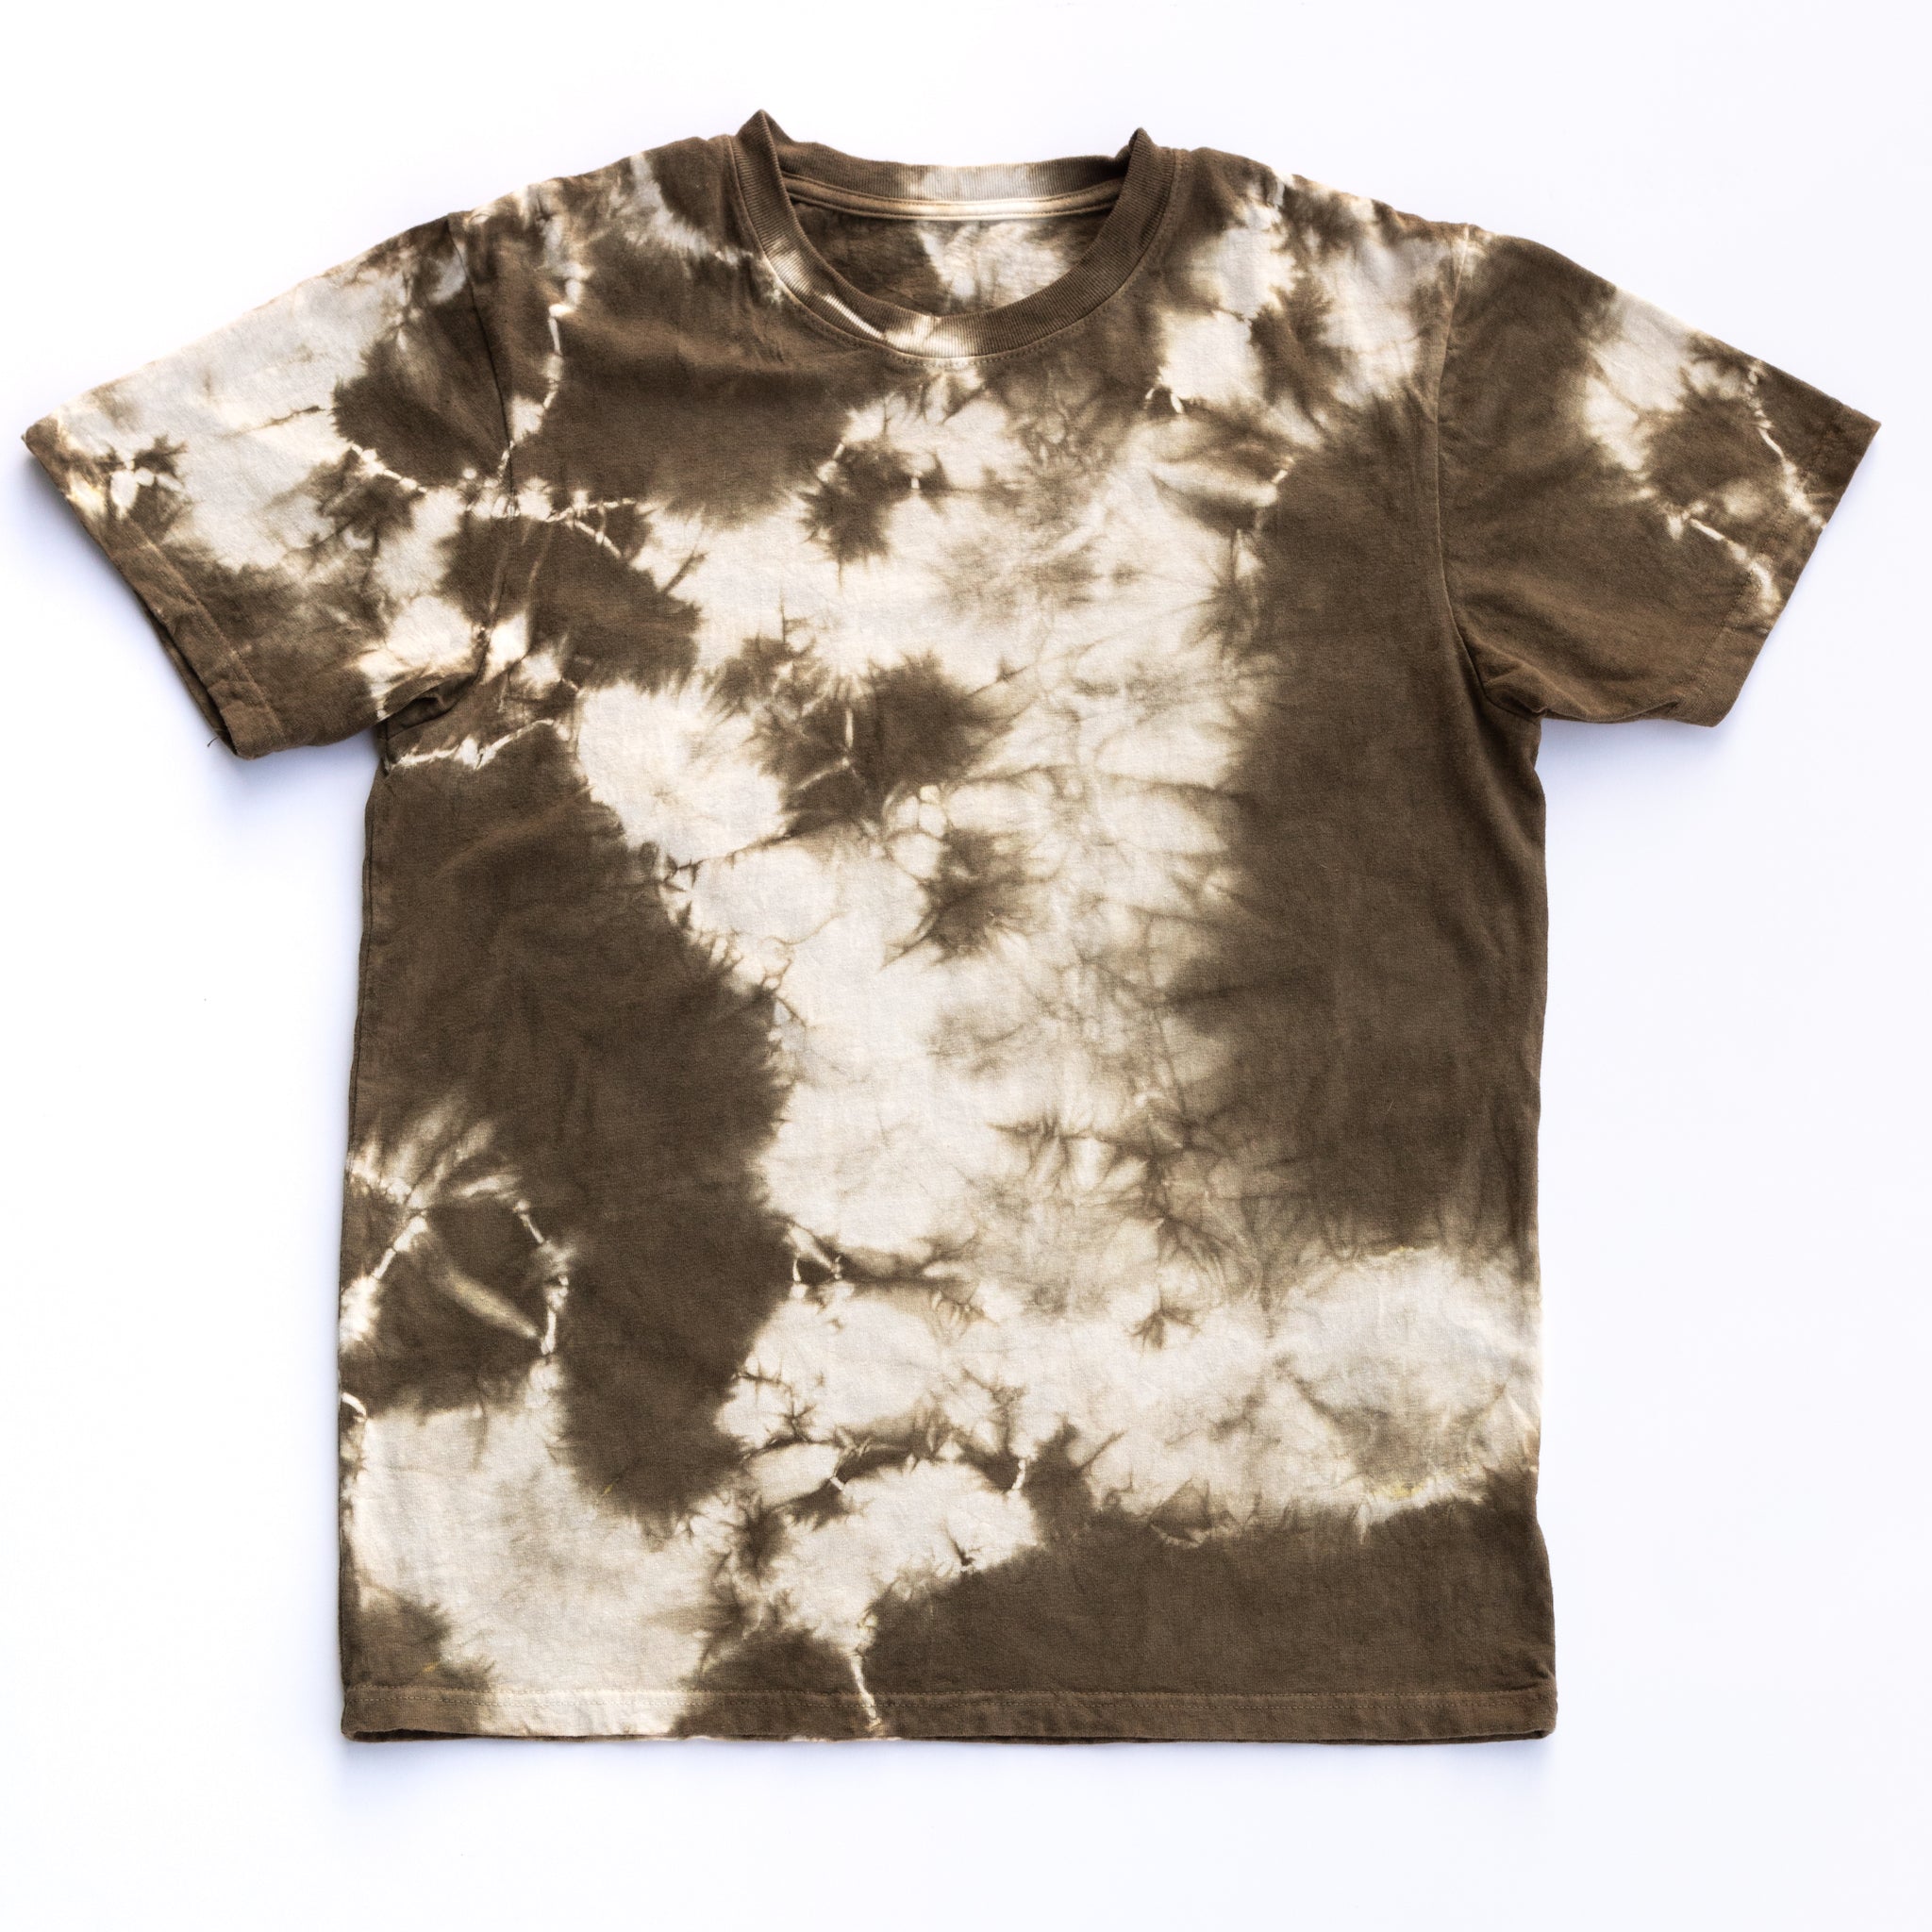 A Solid State Clothing Natural Tie Dye t-shirt lies against a plain background. Because each shirt is hand dyed in the USA, the pattern varies in all photos of shirts. The shirt pictured here has an even amount of green and white in its pattern